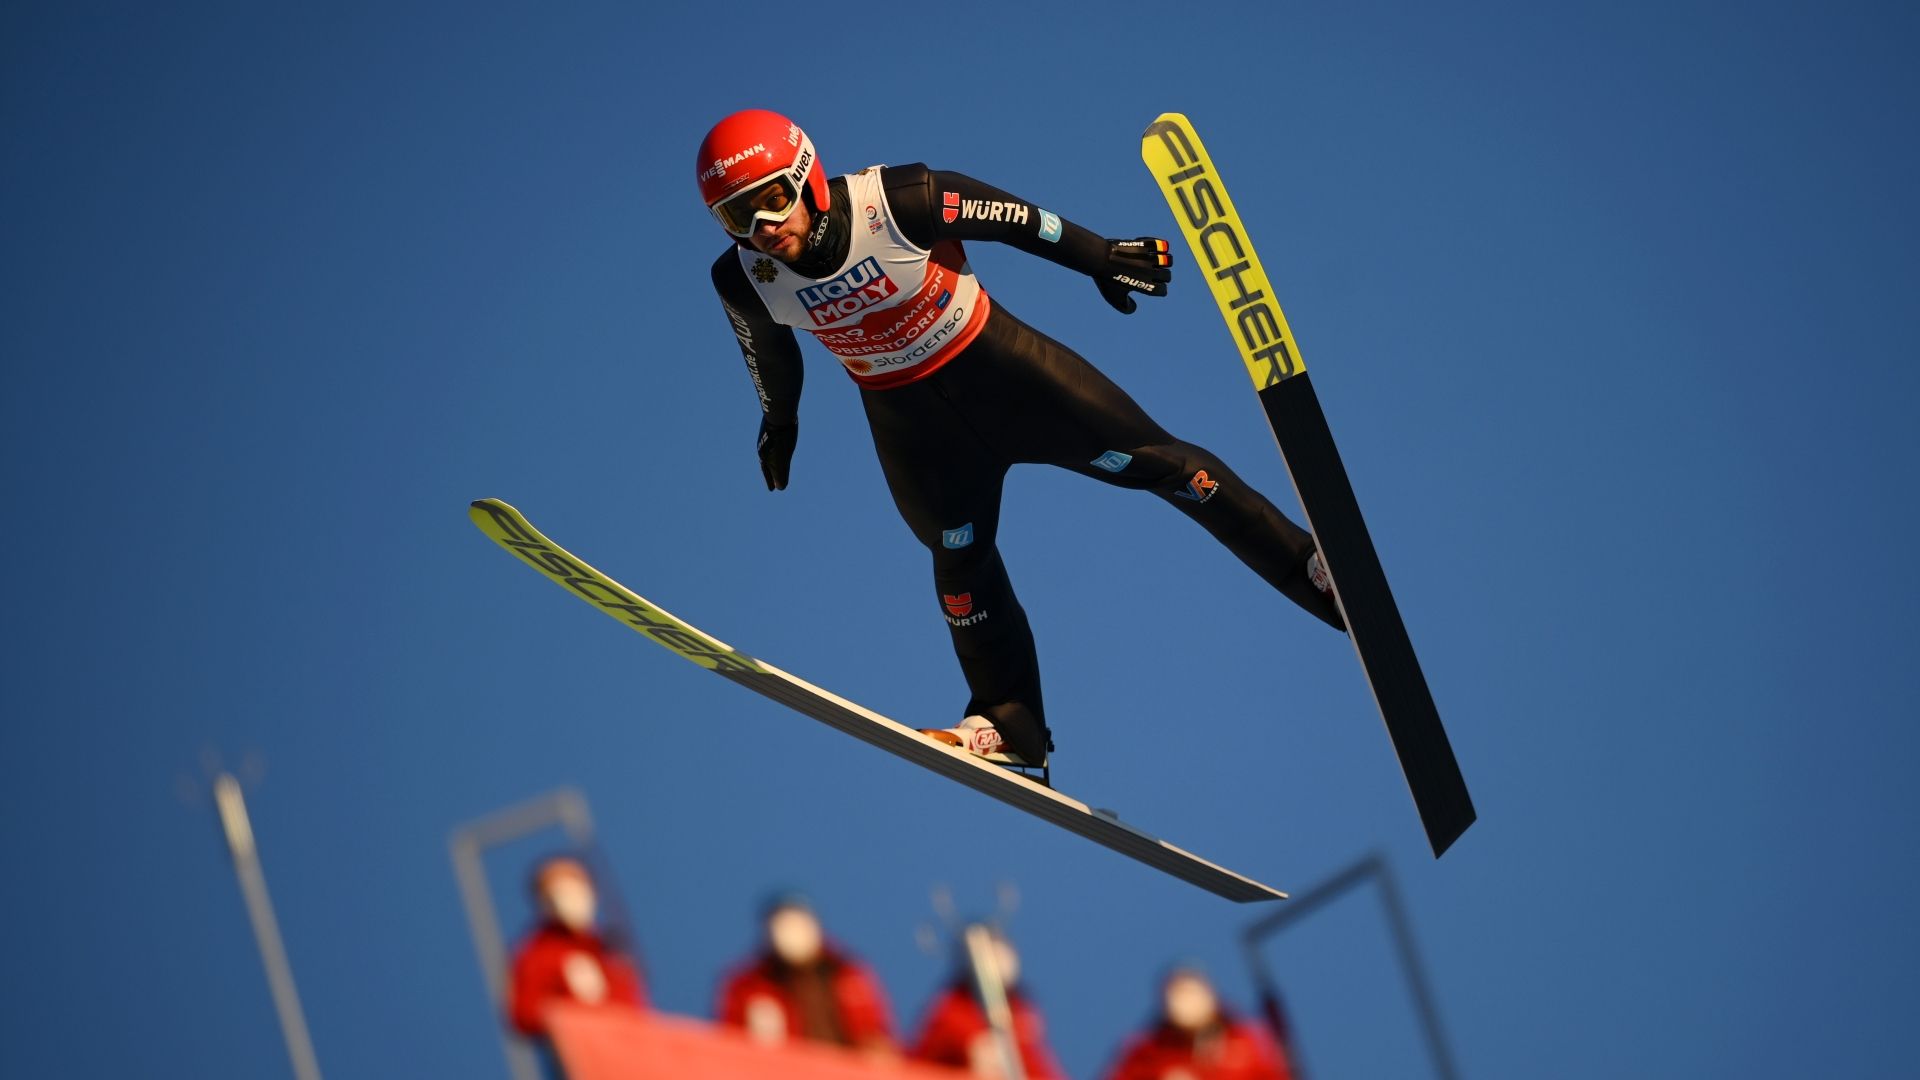 Ski jumping live today The World Cup in Wisla on TV and LIVE STREAM